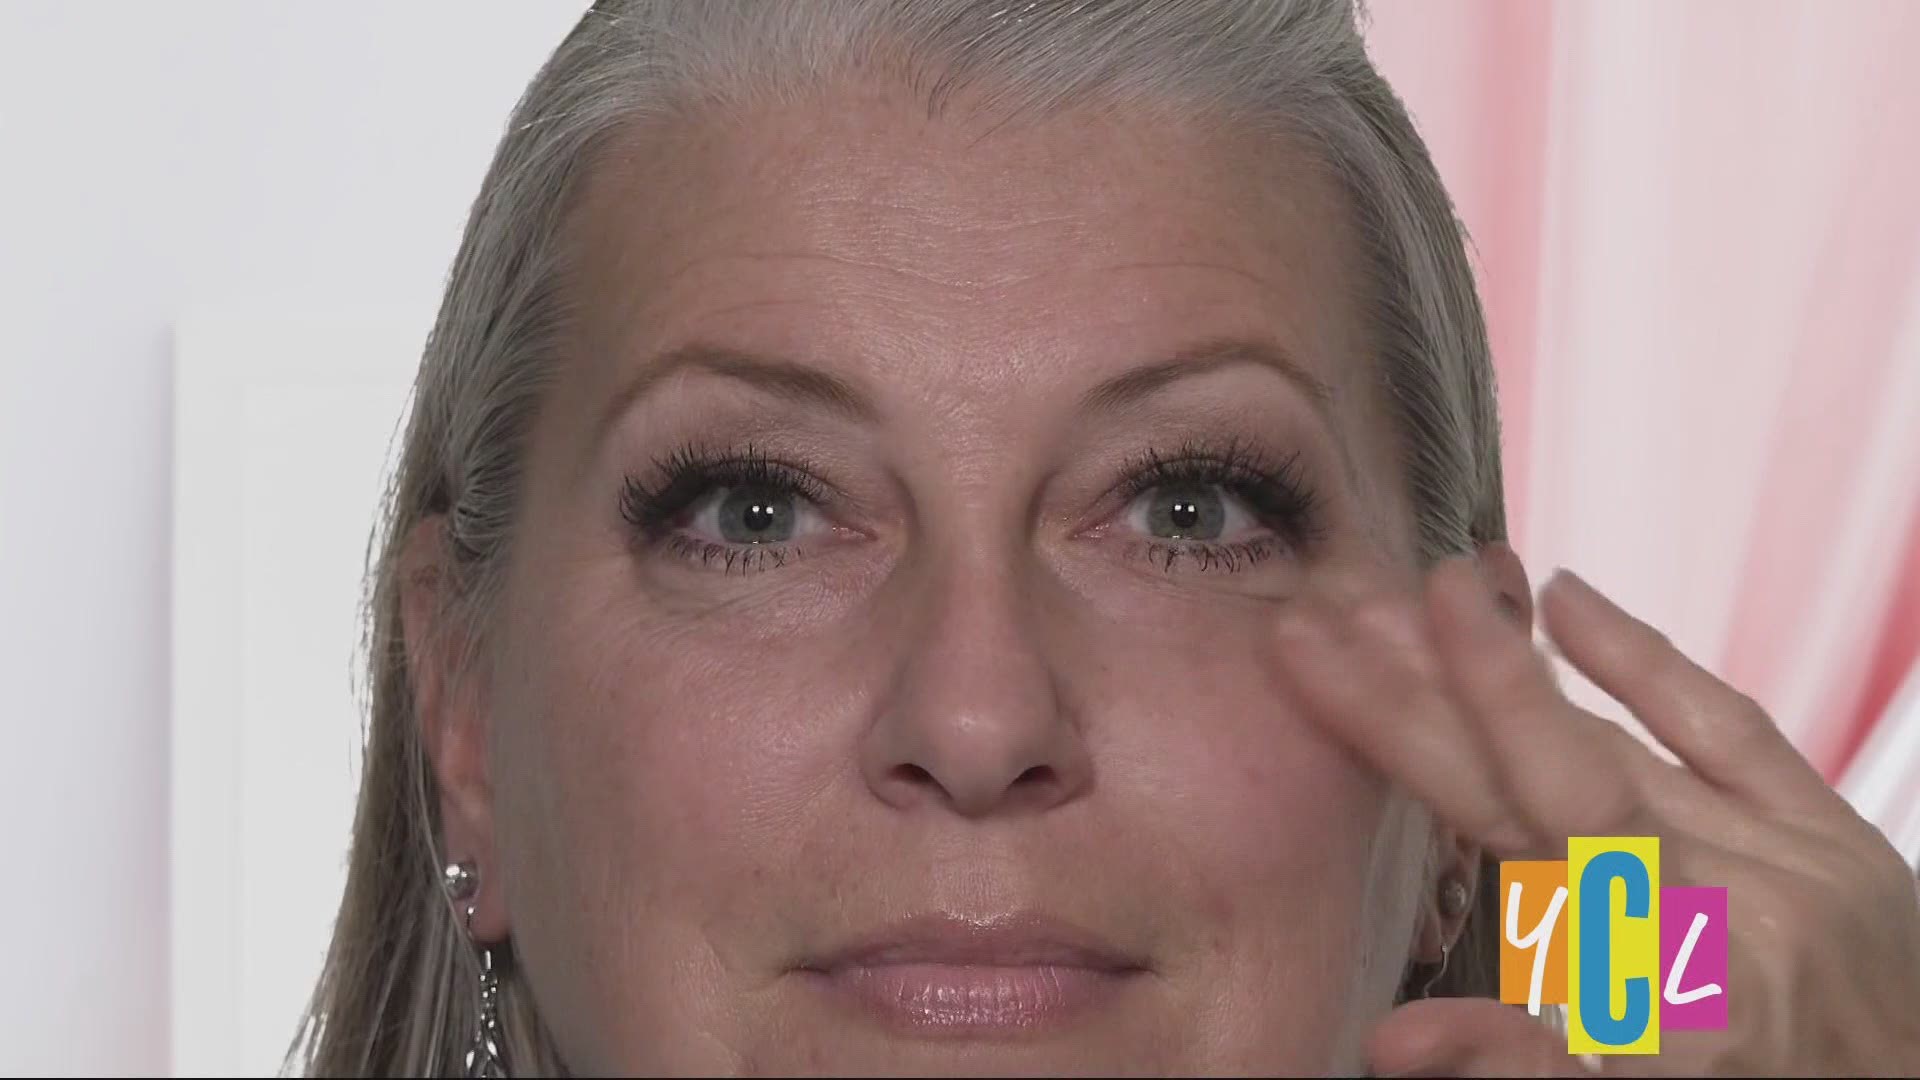 Get rid of those unwanted wrinkles, under eye bags, and dark circles in as little as five minutes. The following is a paid segment.